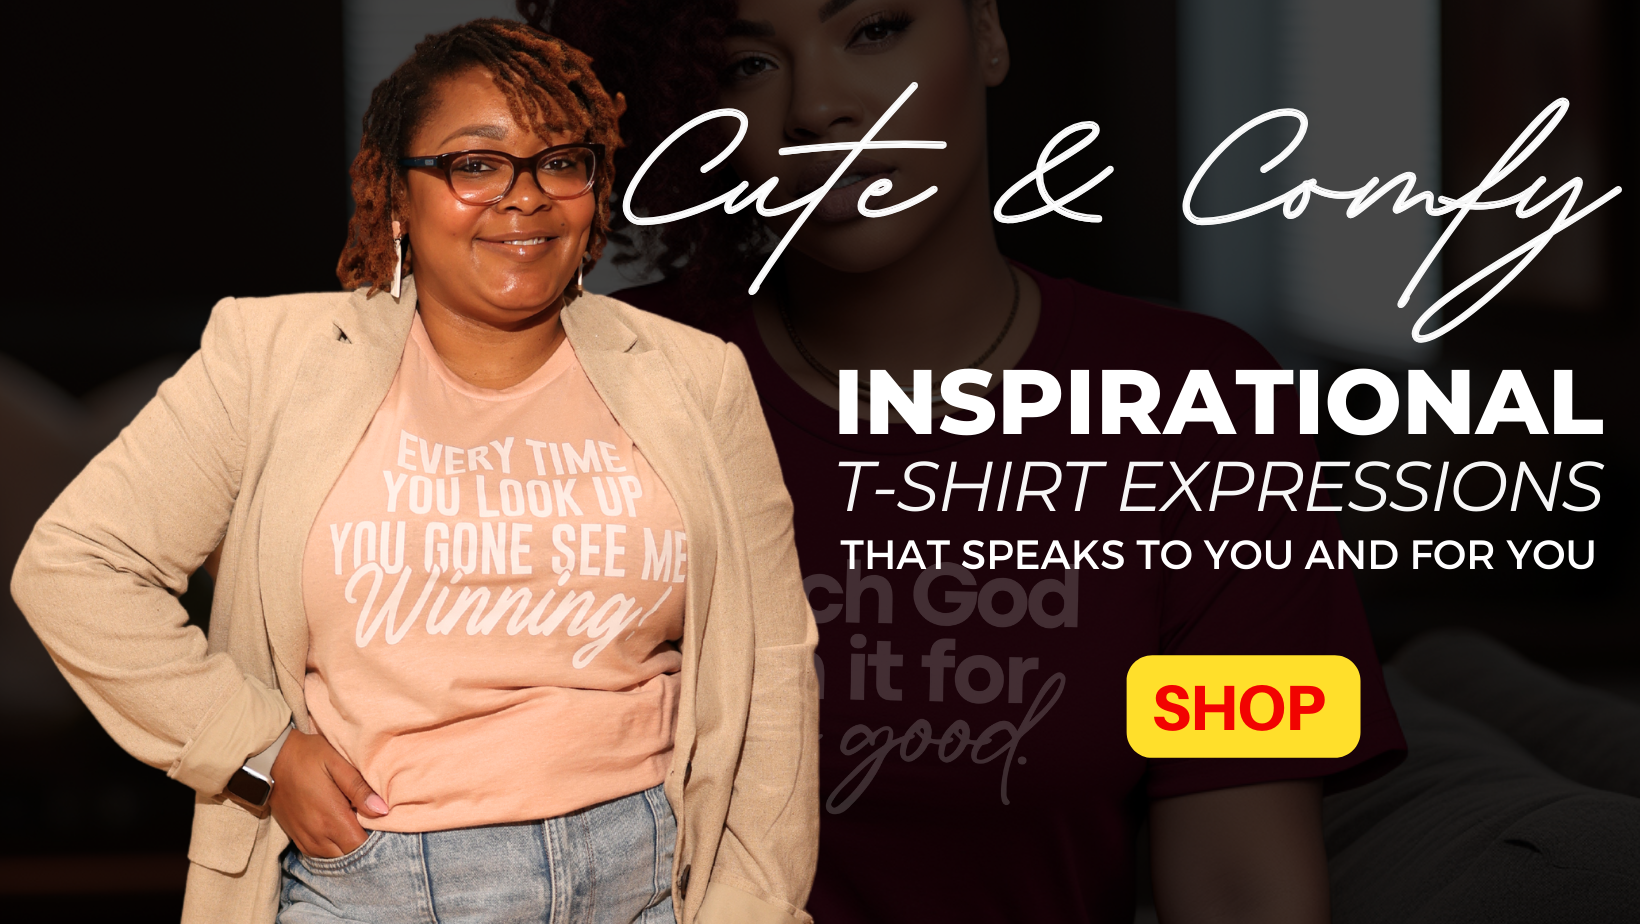 Faith & Inspiration Brand – Speak To Me Expressions